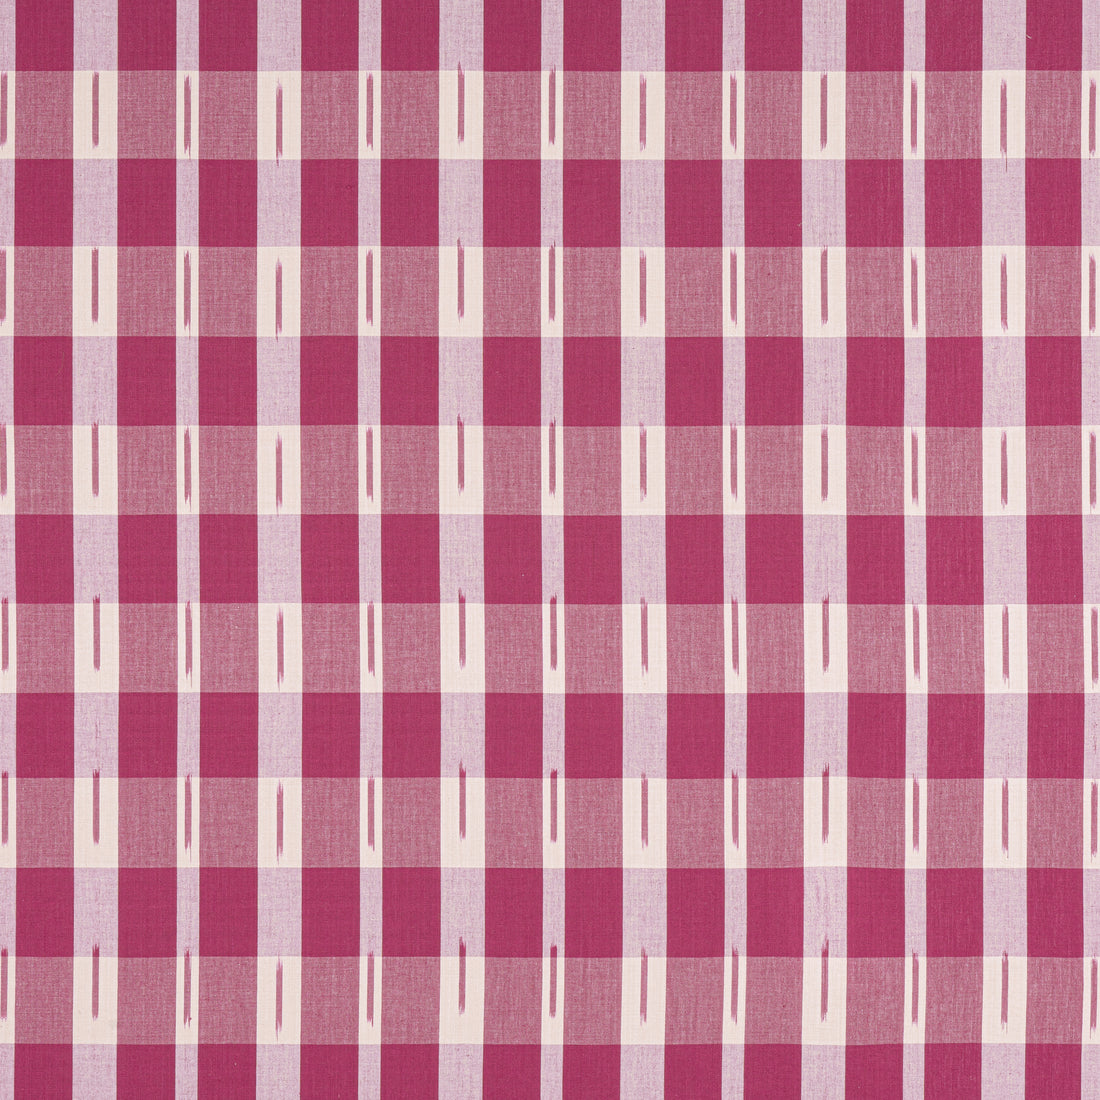 Ellastone Check fabric in raspberry color - pattern number W736440 - by Thibaut in the Indienne collection